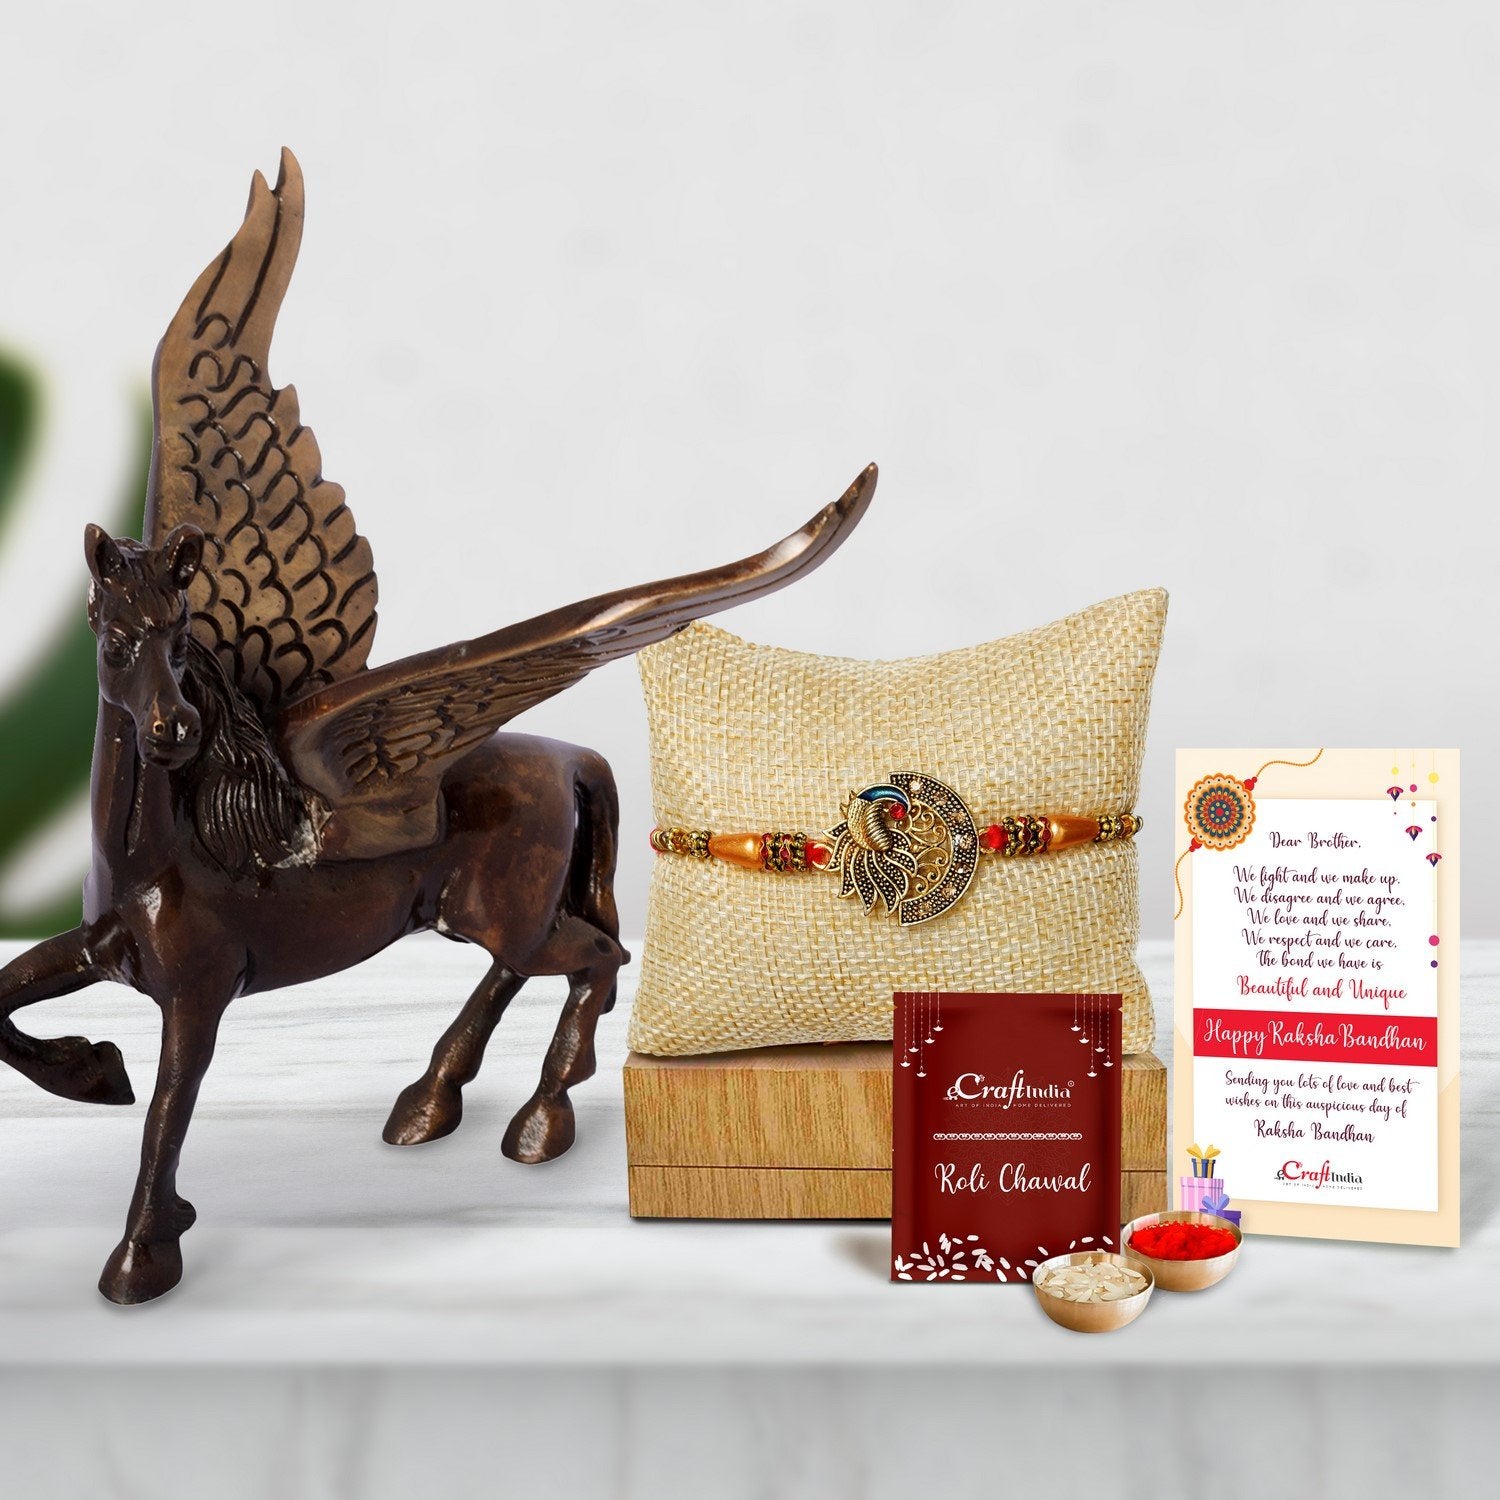 Designer Peacock Rakhi with Brass Antique Finish Flying Angel Horse and Roli Chawal Pack, Best Wishes Greeting Card